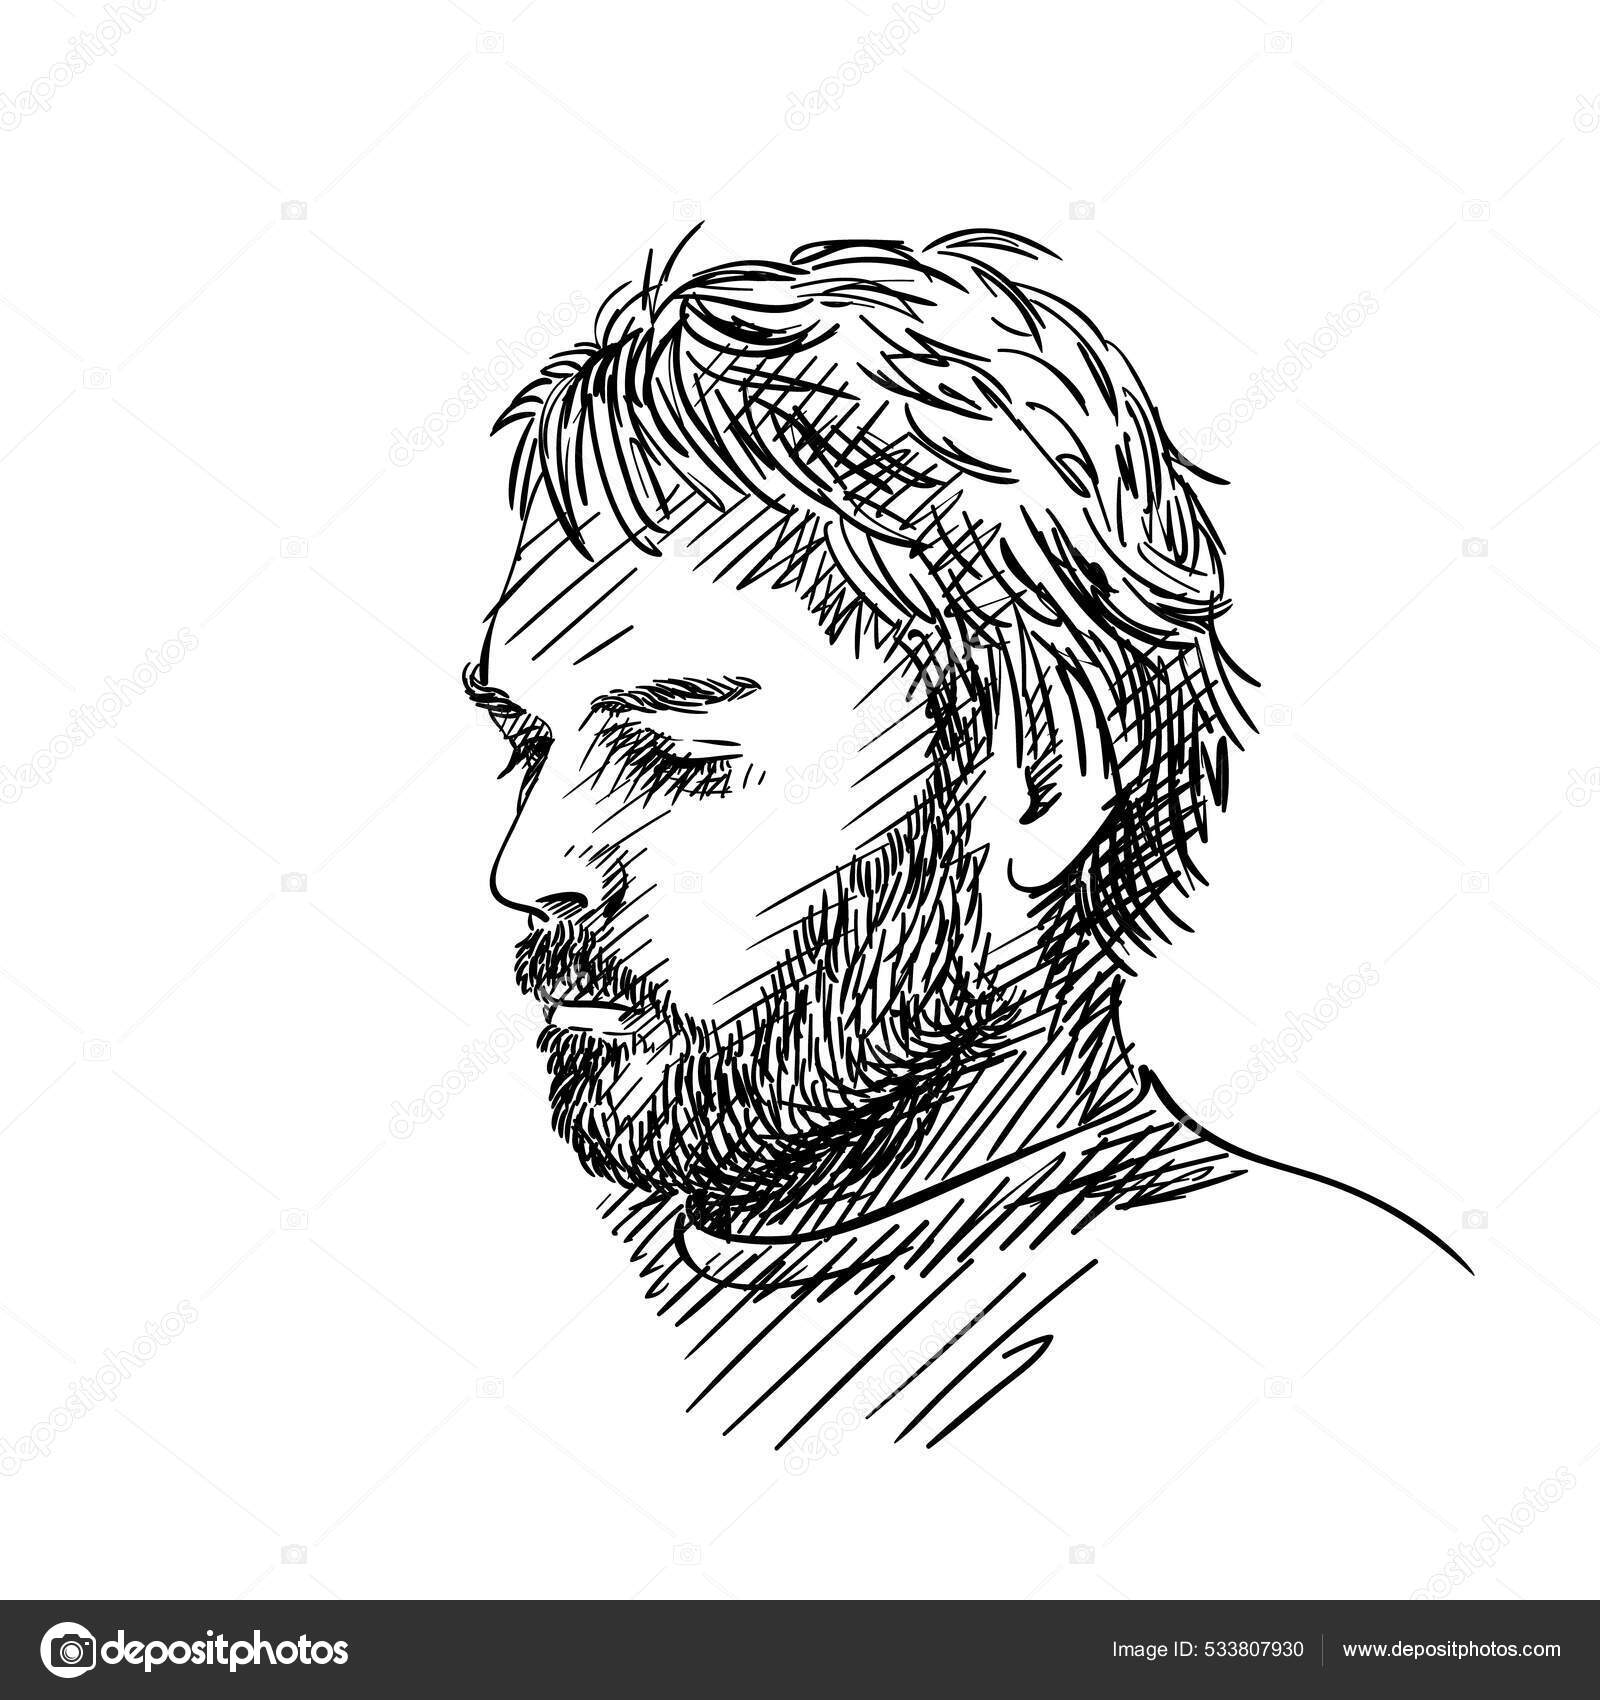 How to Draw a Beard - Really Easy Drawing Tutorial